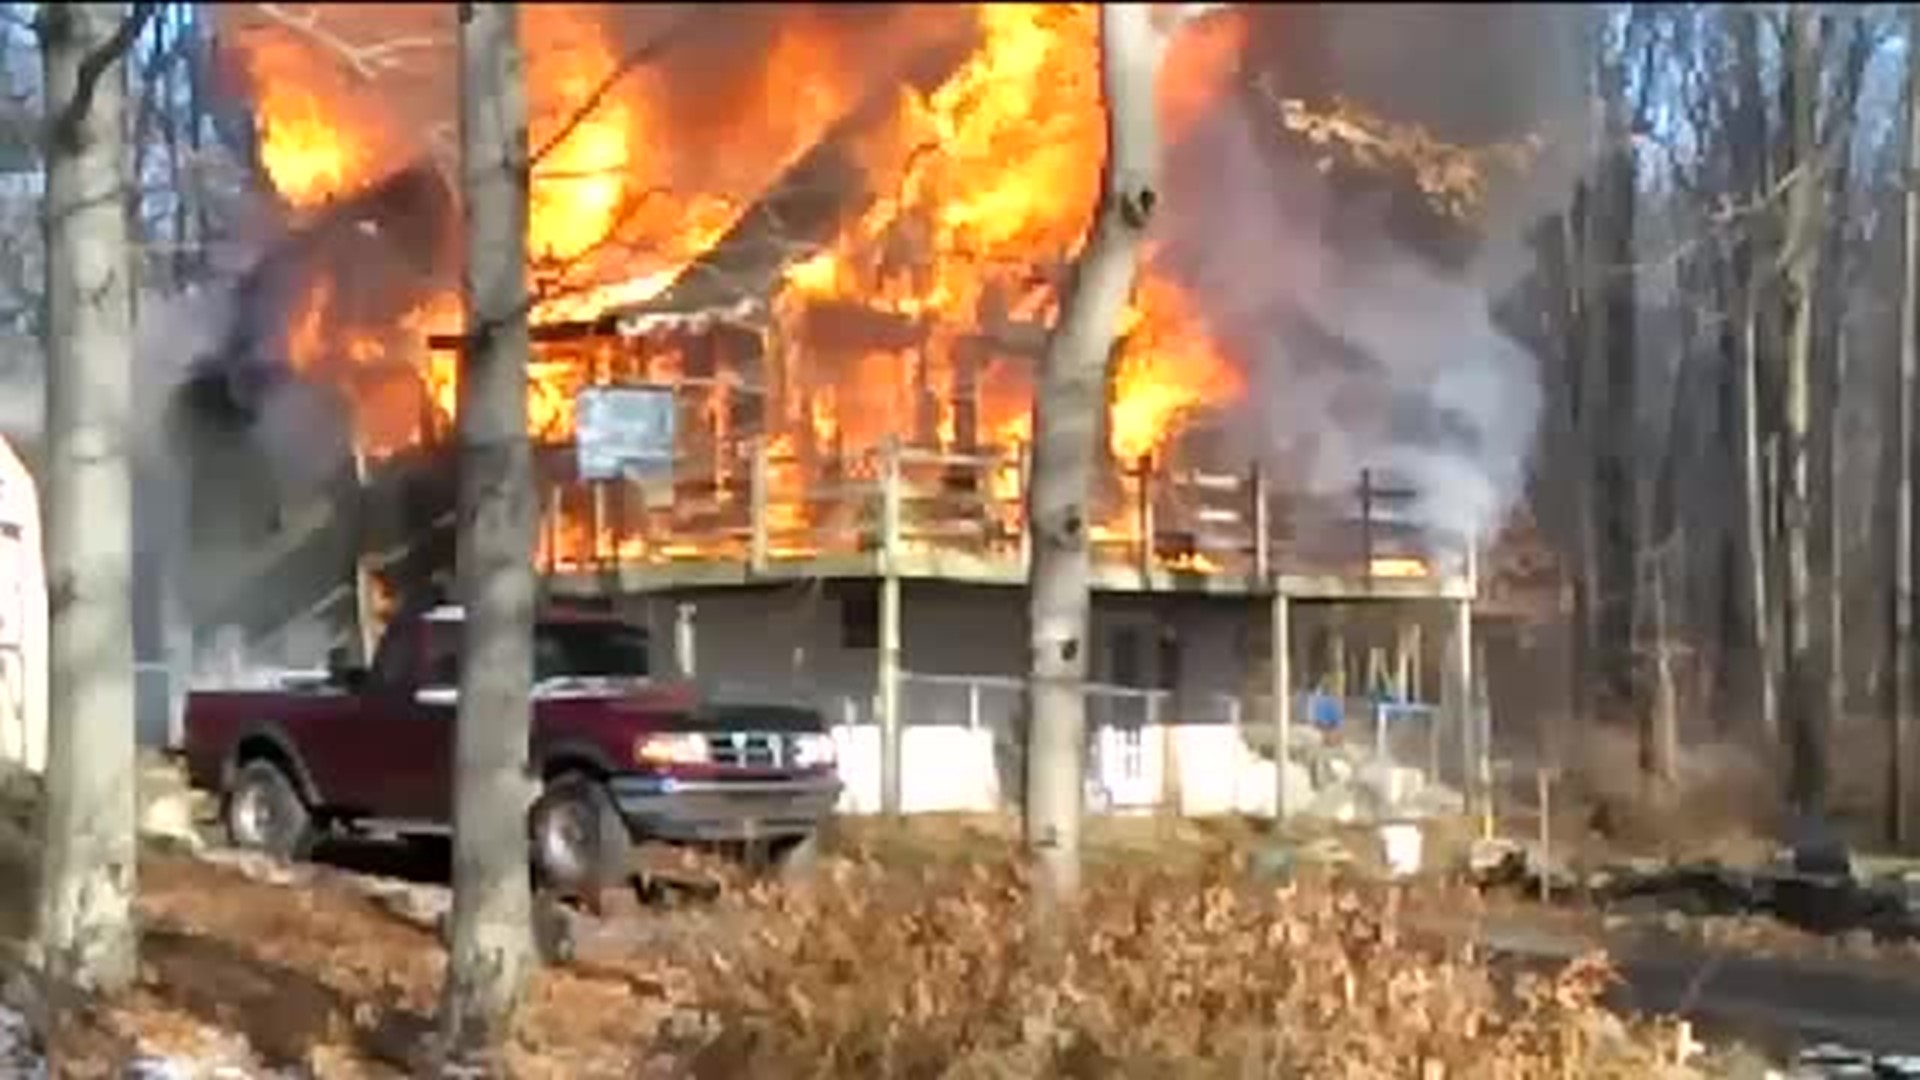 Wayne County Home Gutted by Fire